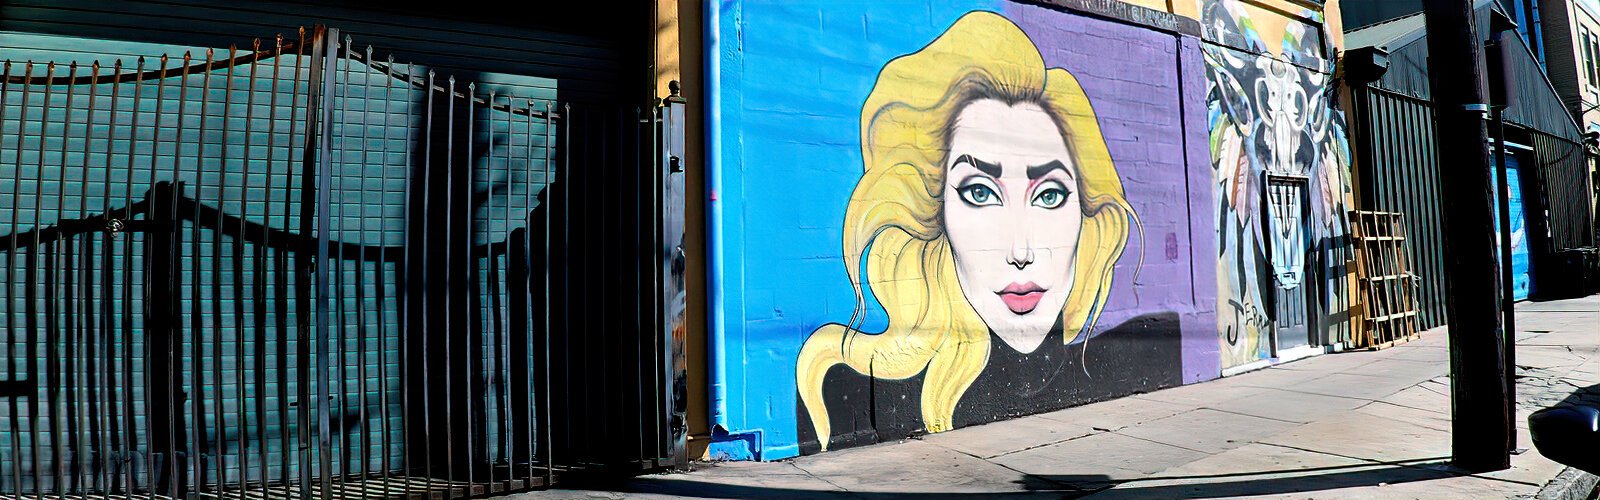 Tampa artist Cameron Parker, aka "Painkiller Cam," put more than 100 hours of work into this larger-than-life mural of his pop idol Lady Gaga ahead of her 2017 Tampa concert.